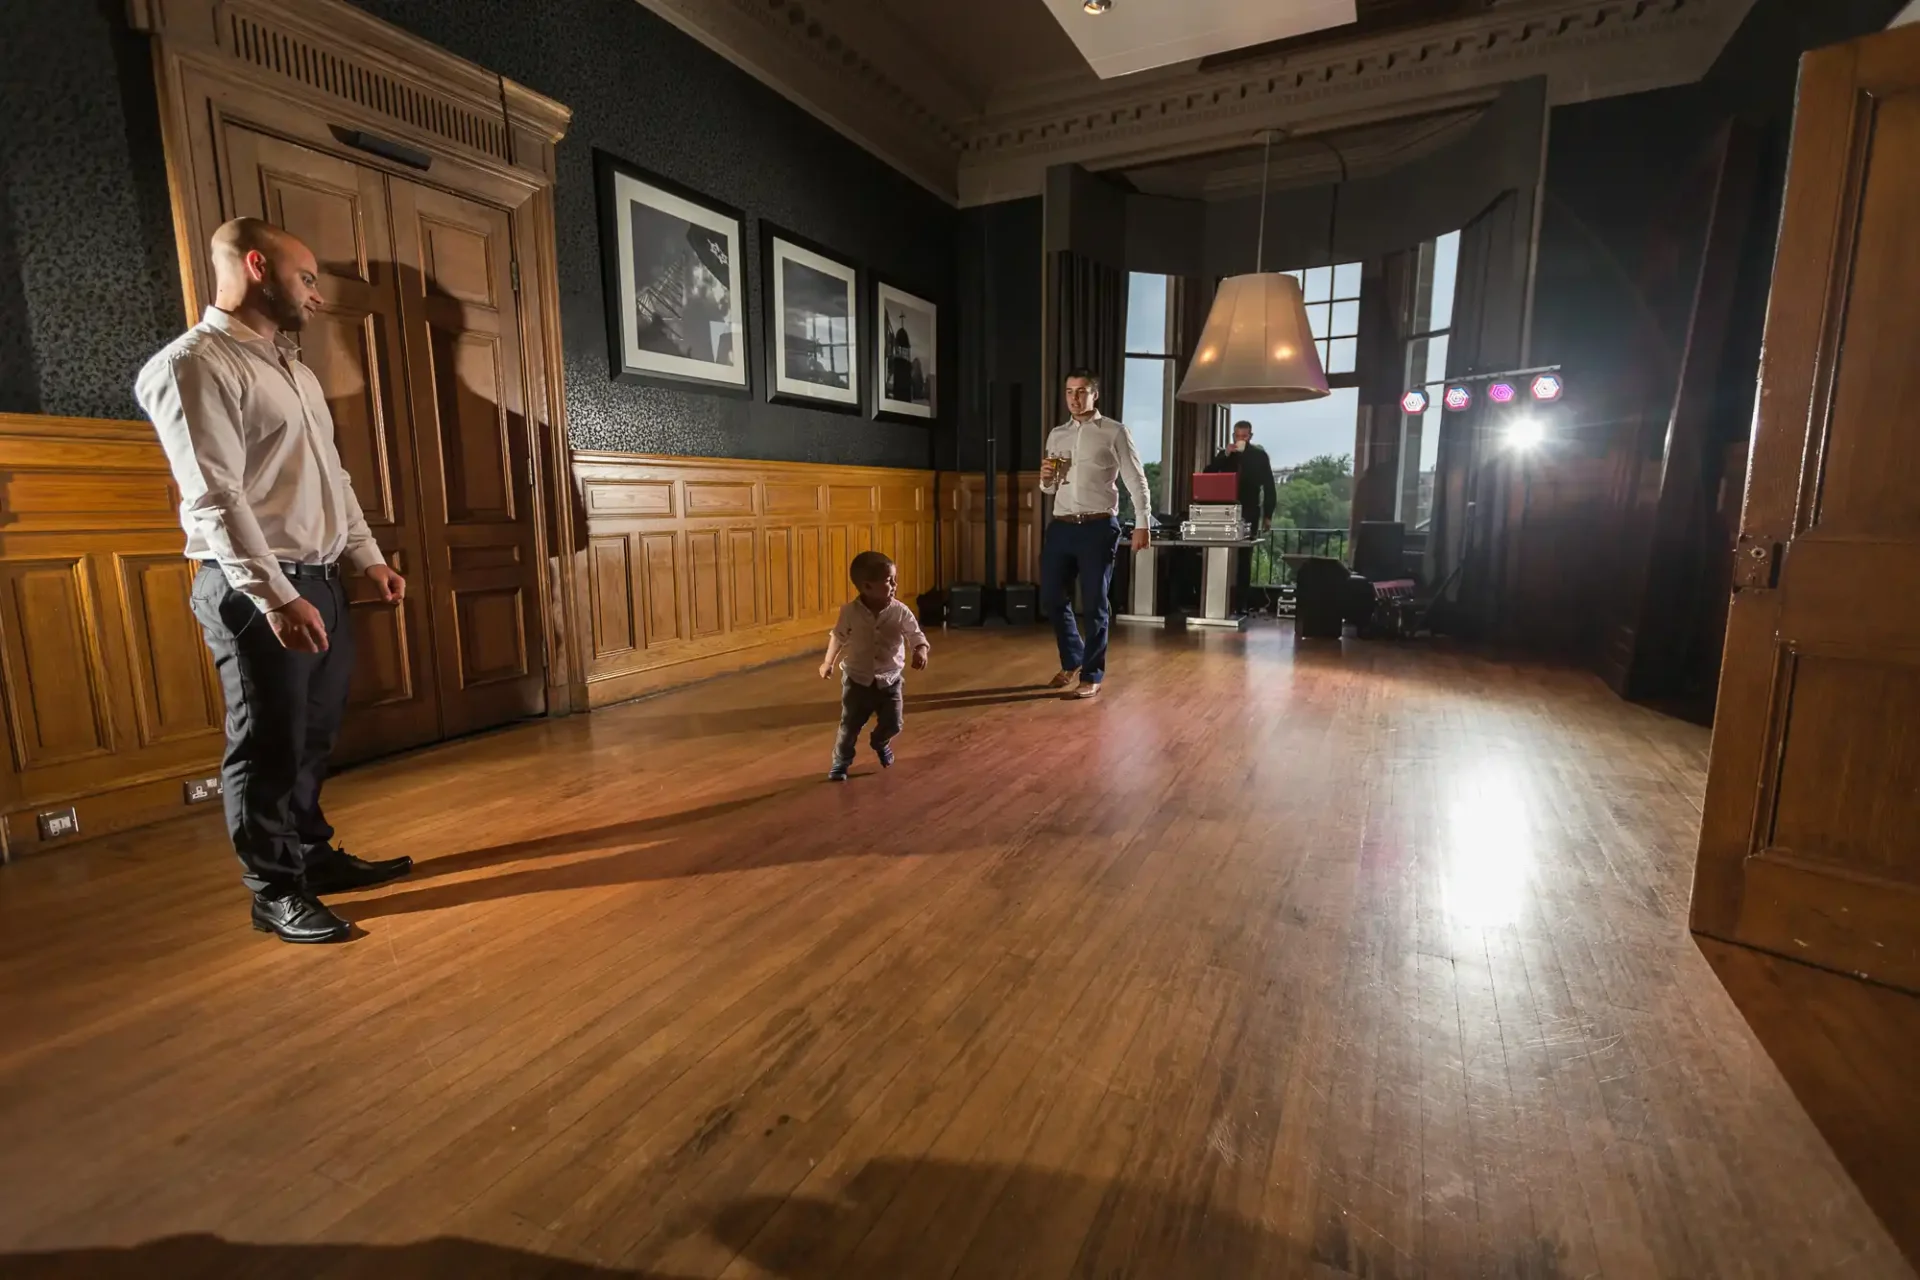 A toddler walks across a wooden-floored room towards two men standing near the entrance, with framed photographs on the walls.